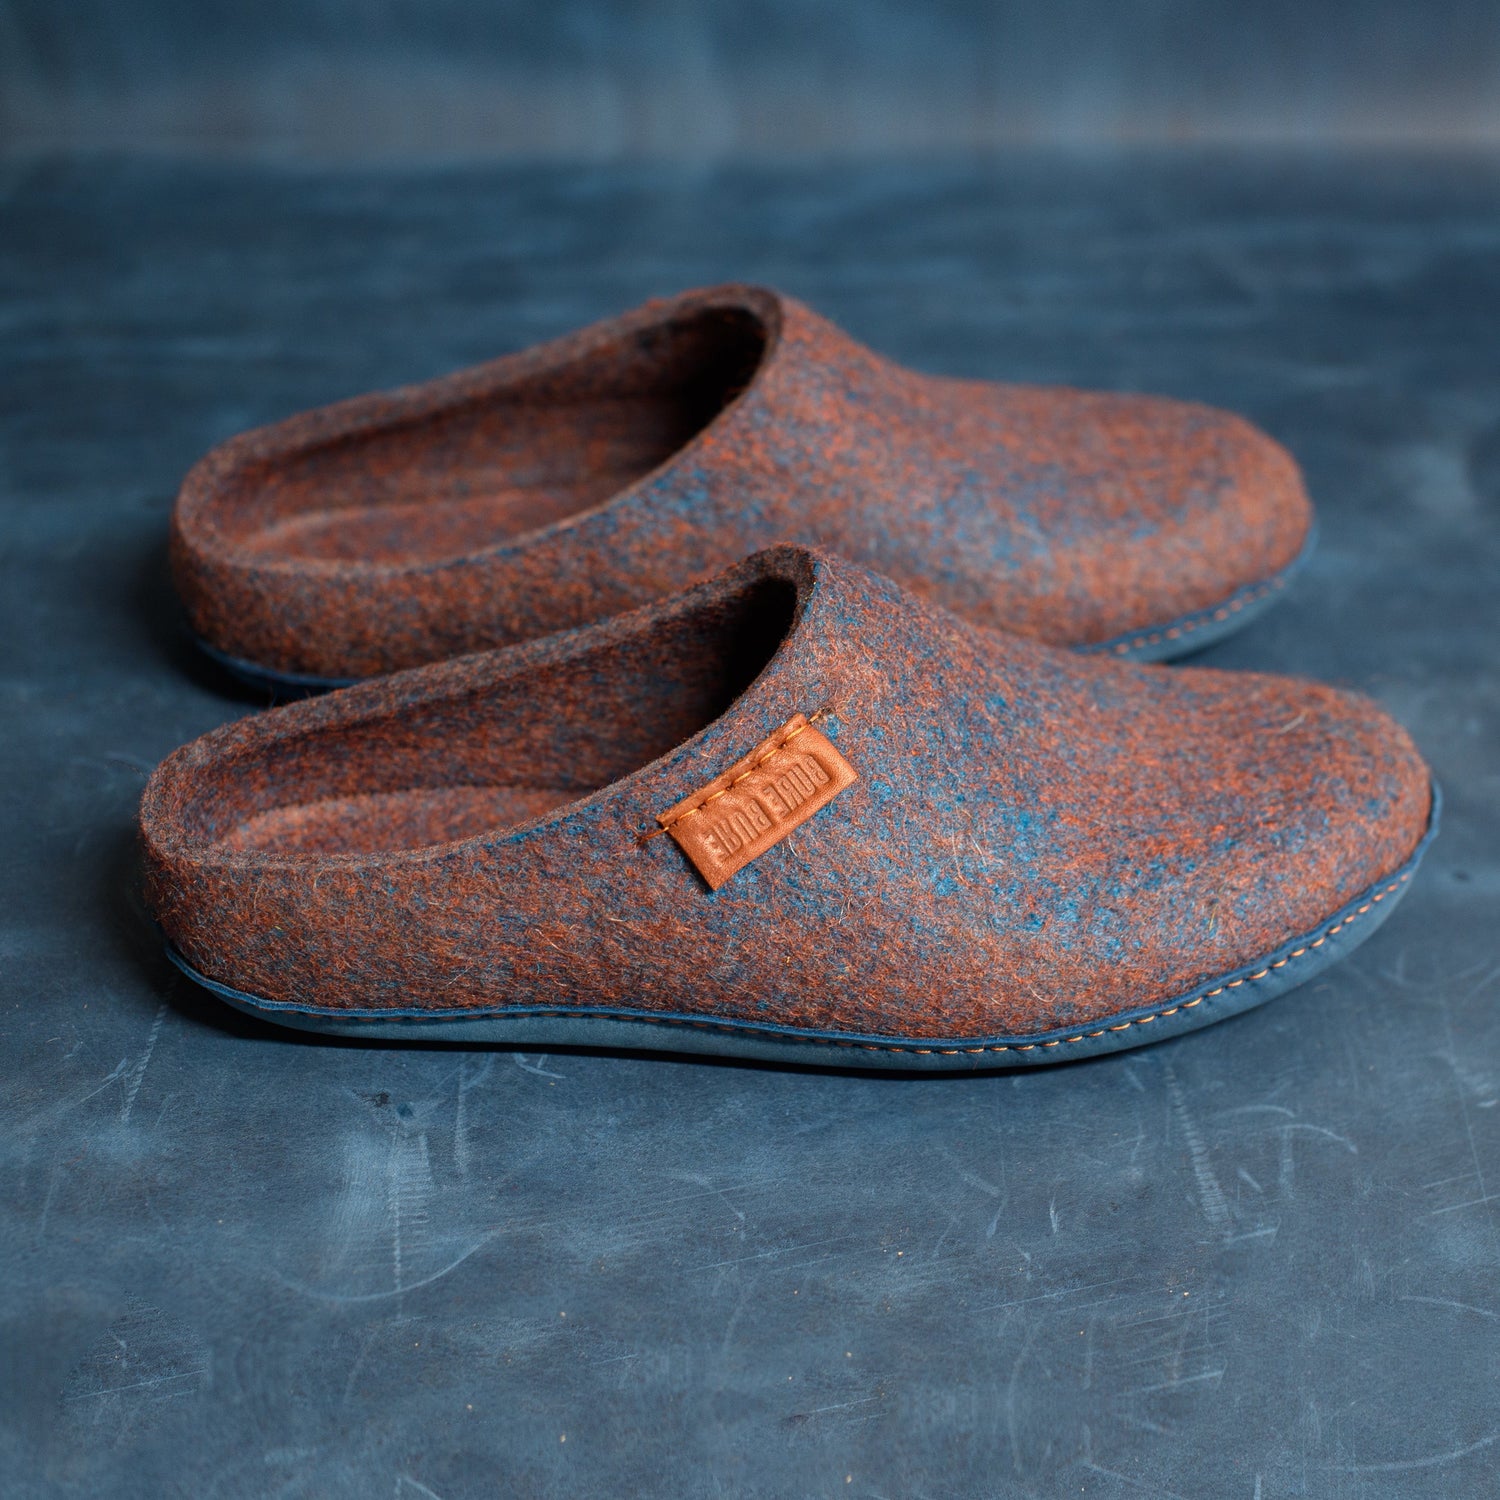 BureBure - Handcrafted Slippers for Your Comfort, & Wellne – BureBure shoes and slippers